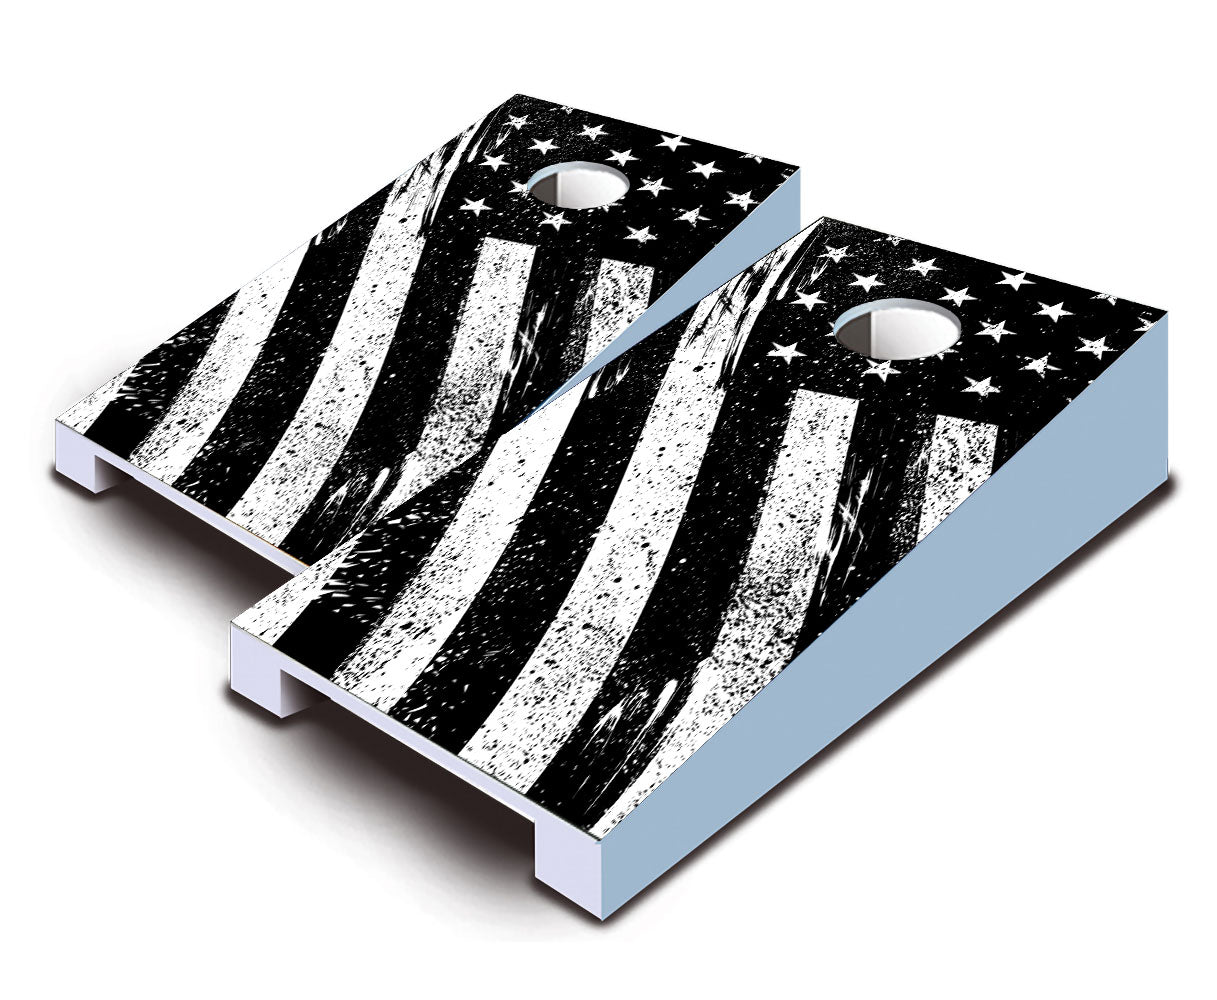 "Black and White Grunge American Flag" Tabletop Cornhole Boards